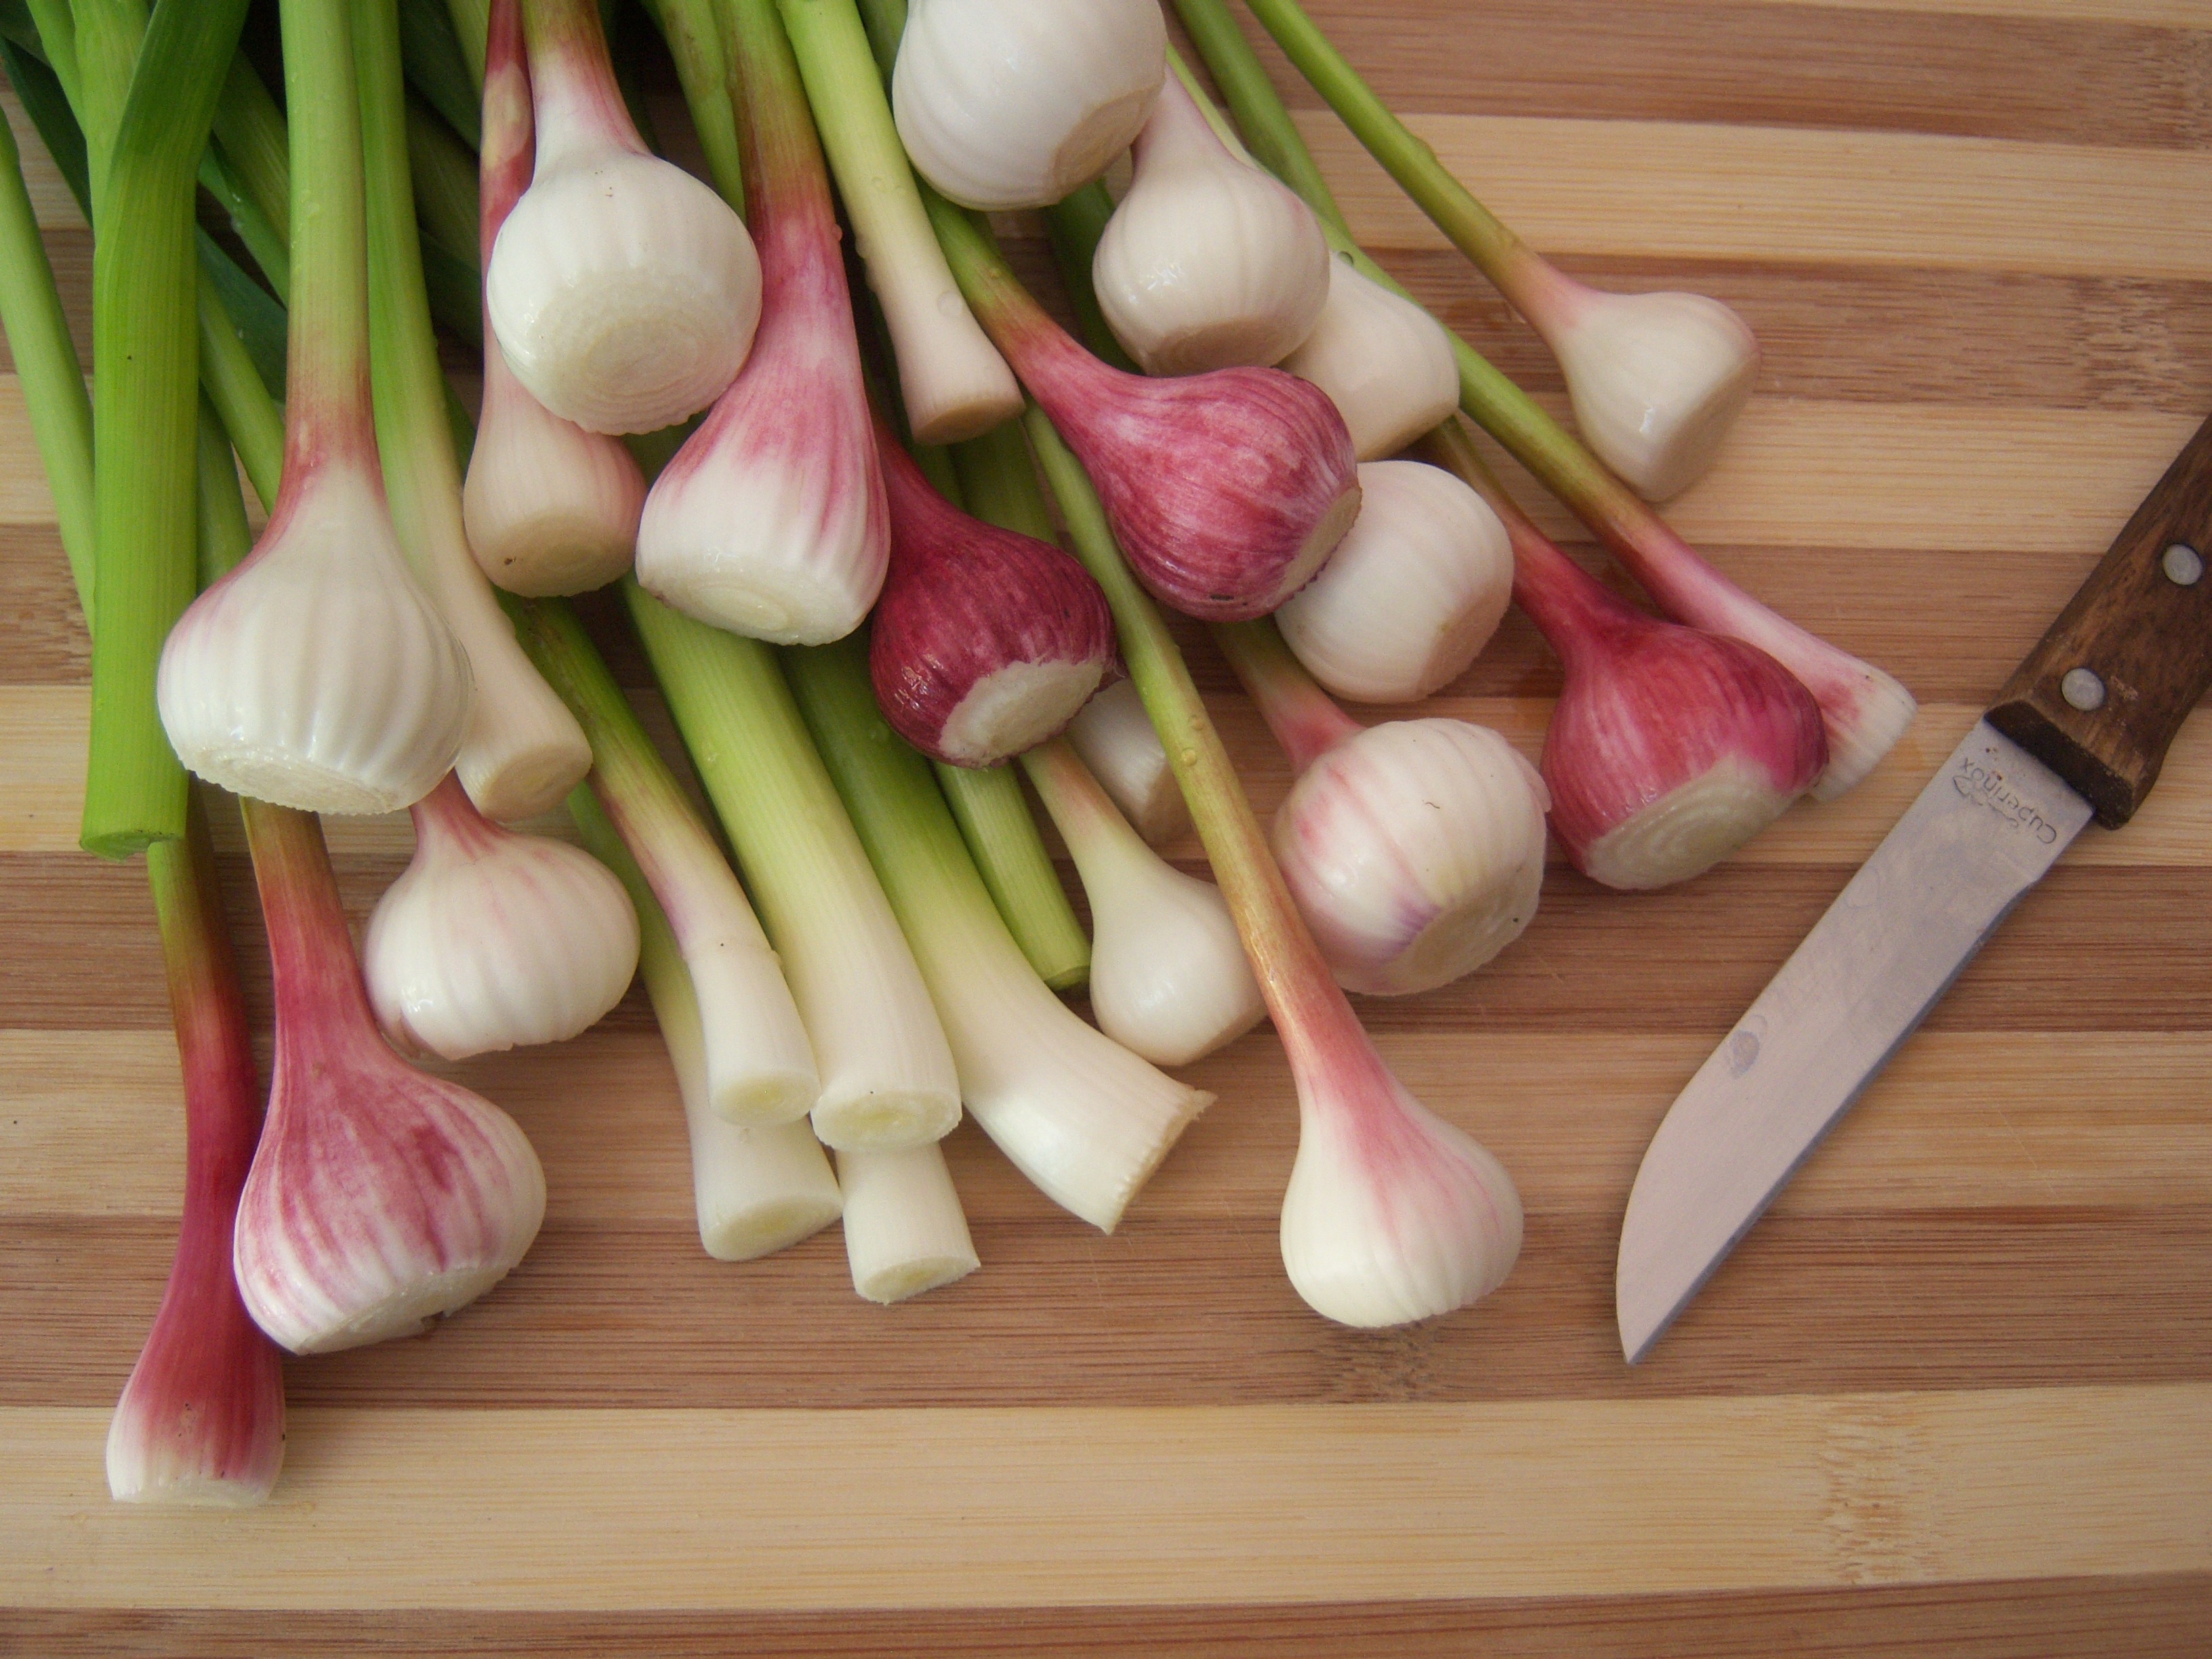 Best Garlic wallpapers for phone screen